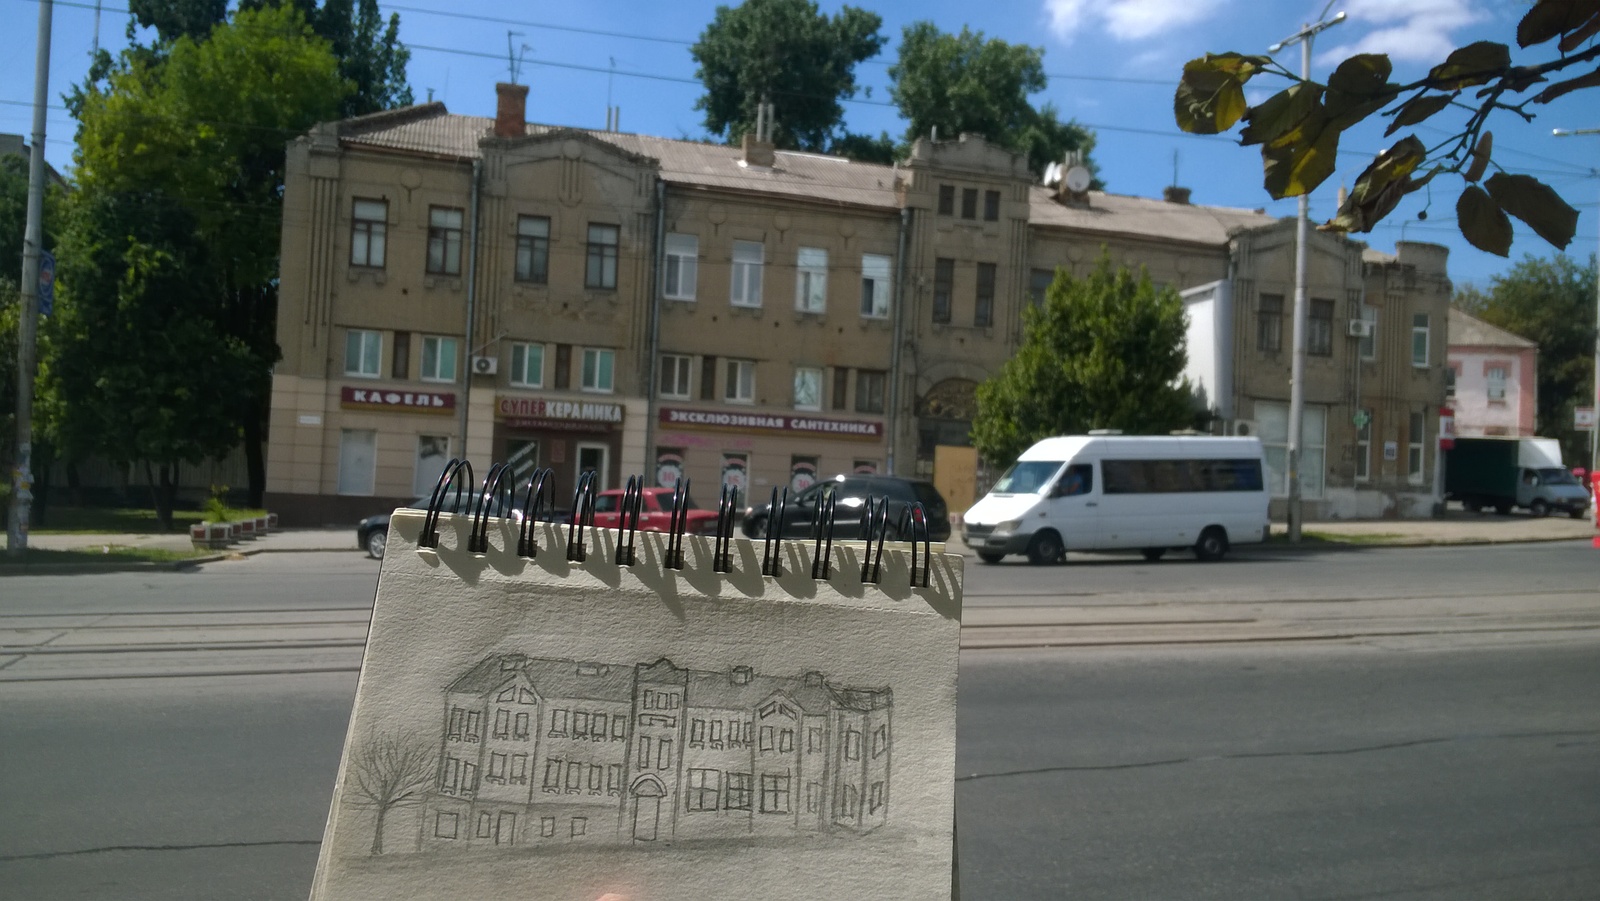 Hometown Sketches - My, Longpost, Sketch, Hiking, Simple pencil, Sketch, Attempt, Historical building